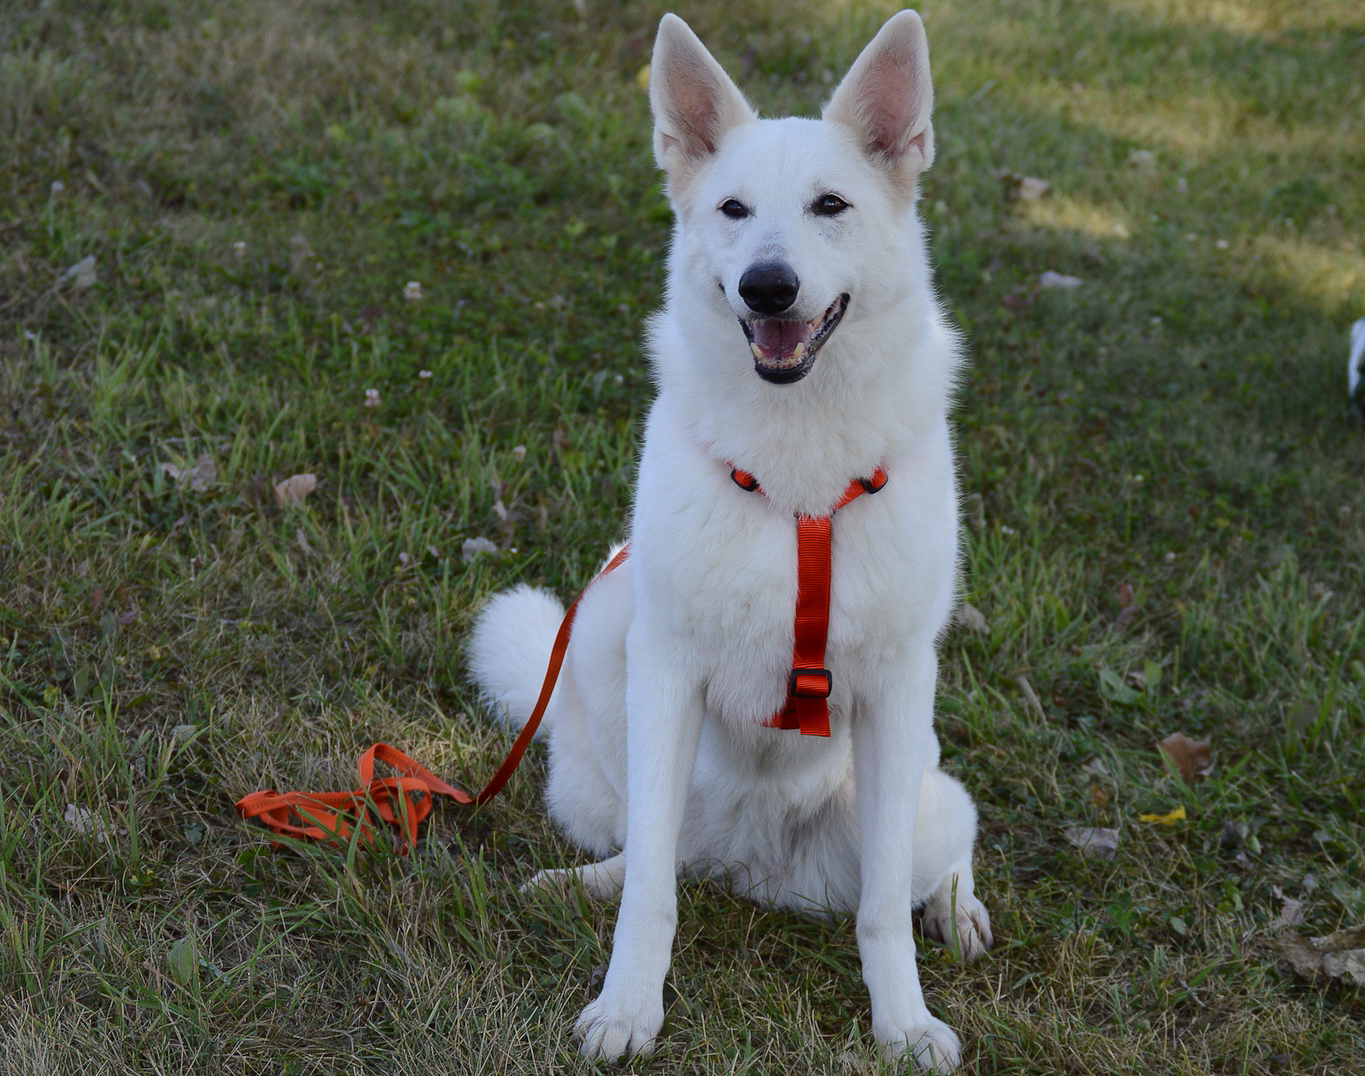  SoftWeb™ 1" Medium Non-Restrictive Tracking Harness in Flame Orange. SoftWeb™ 9/16" Snap Lead in Flame Orange. 